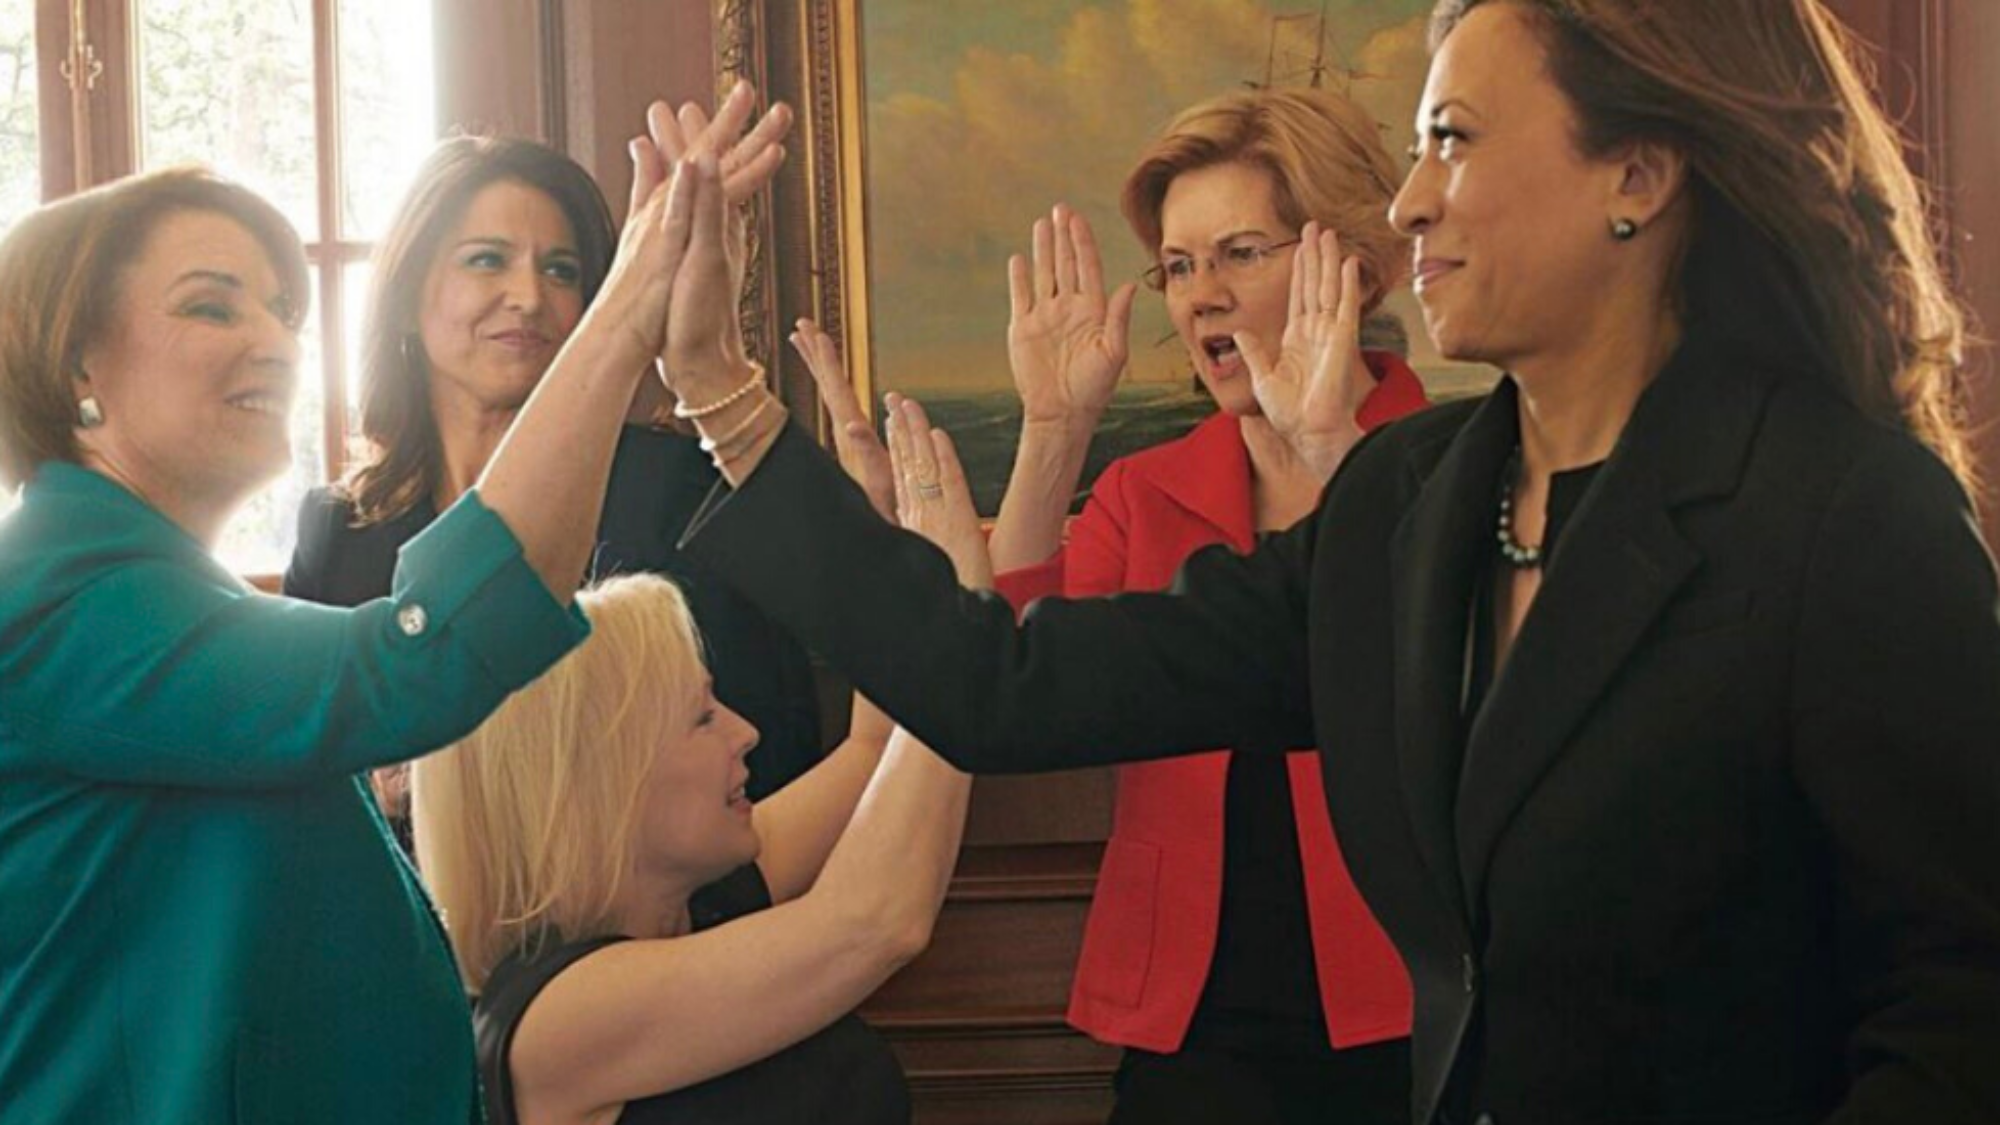 Female political leaders giving each other high-fives